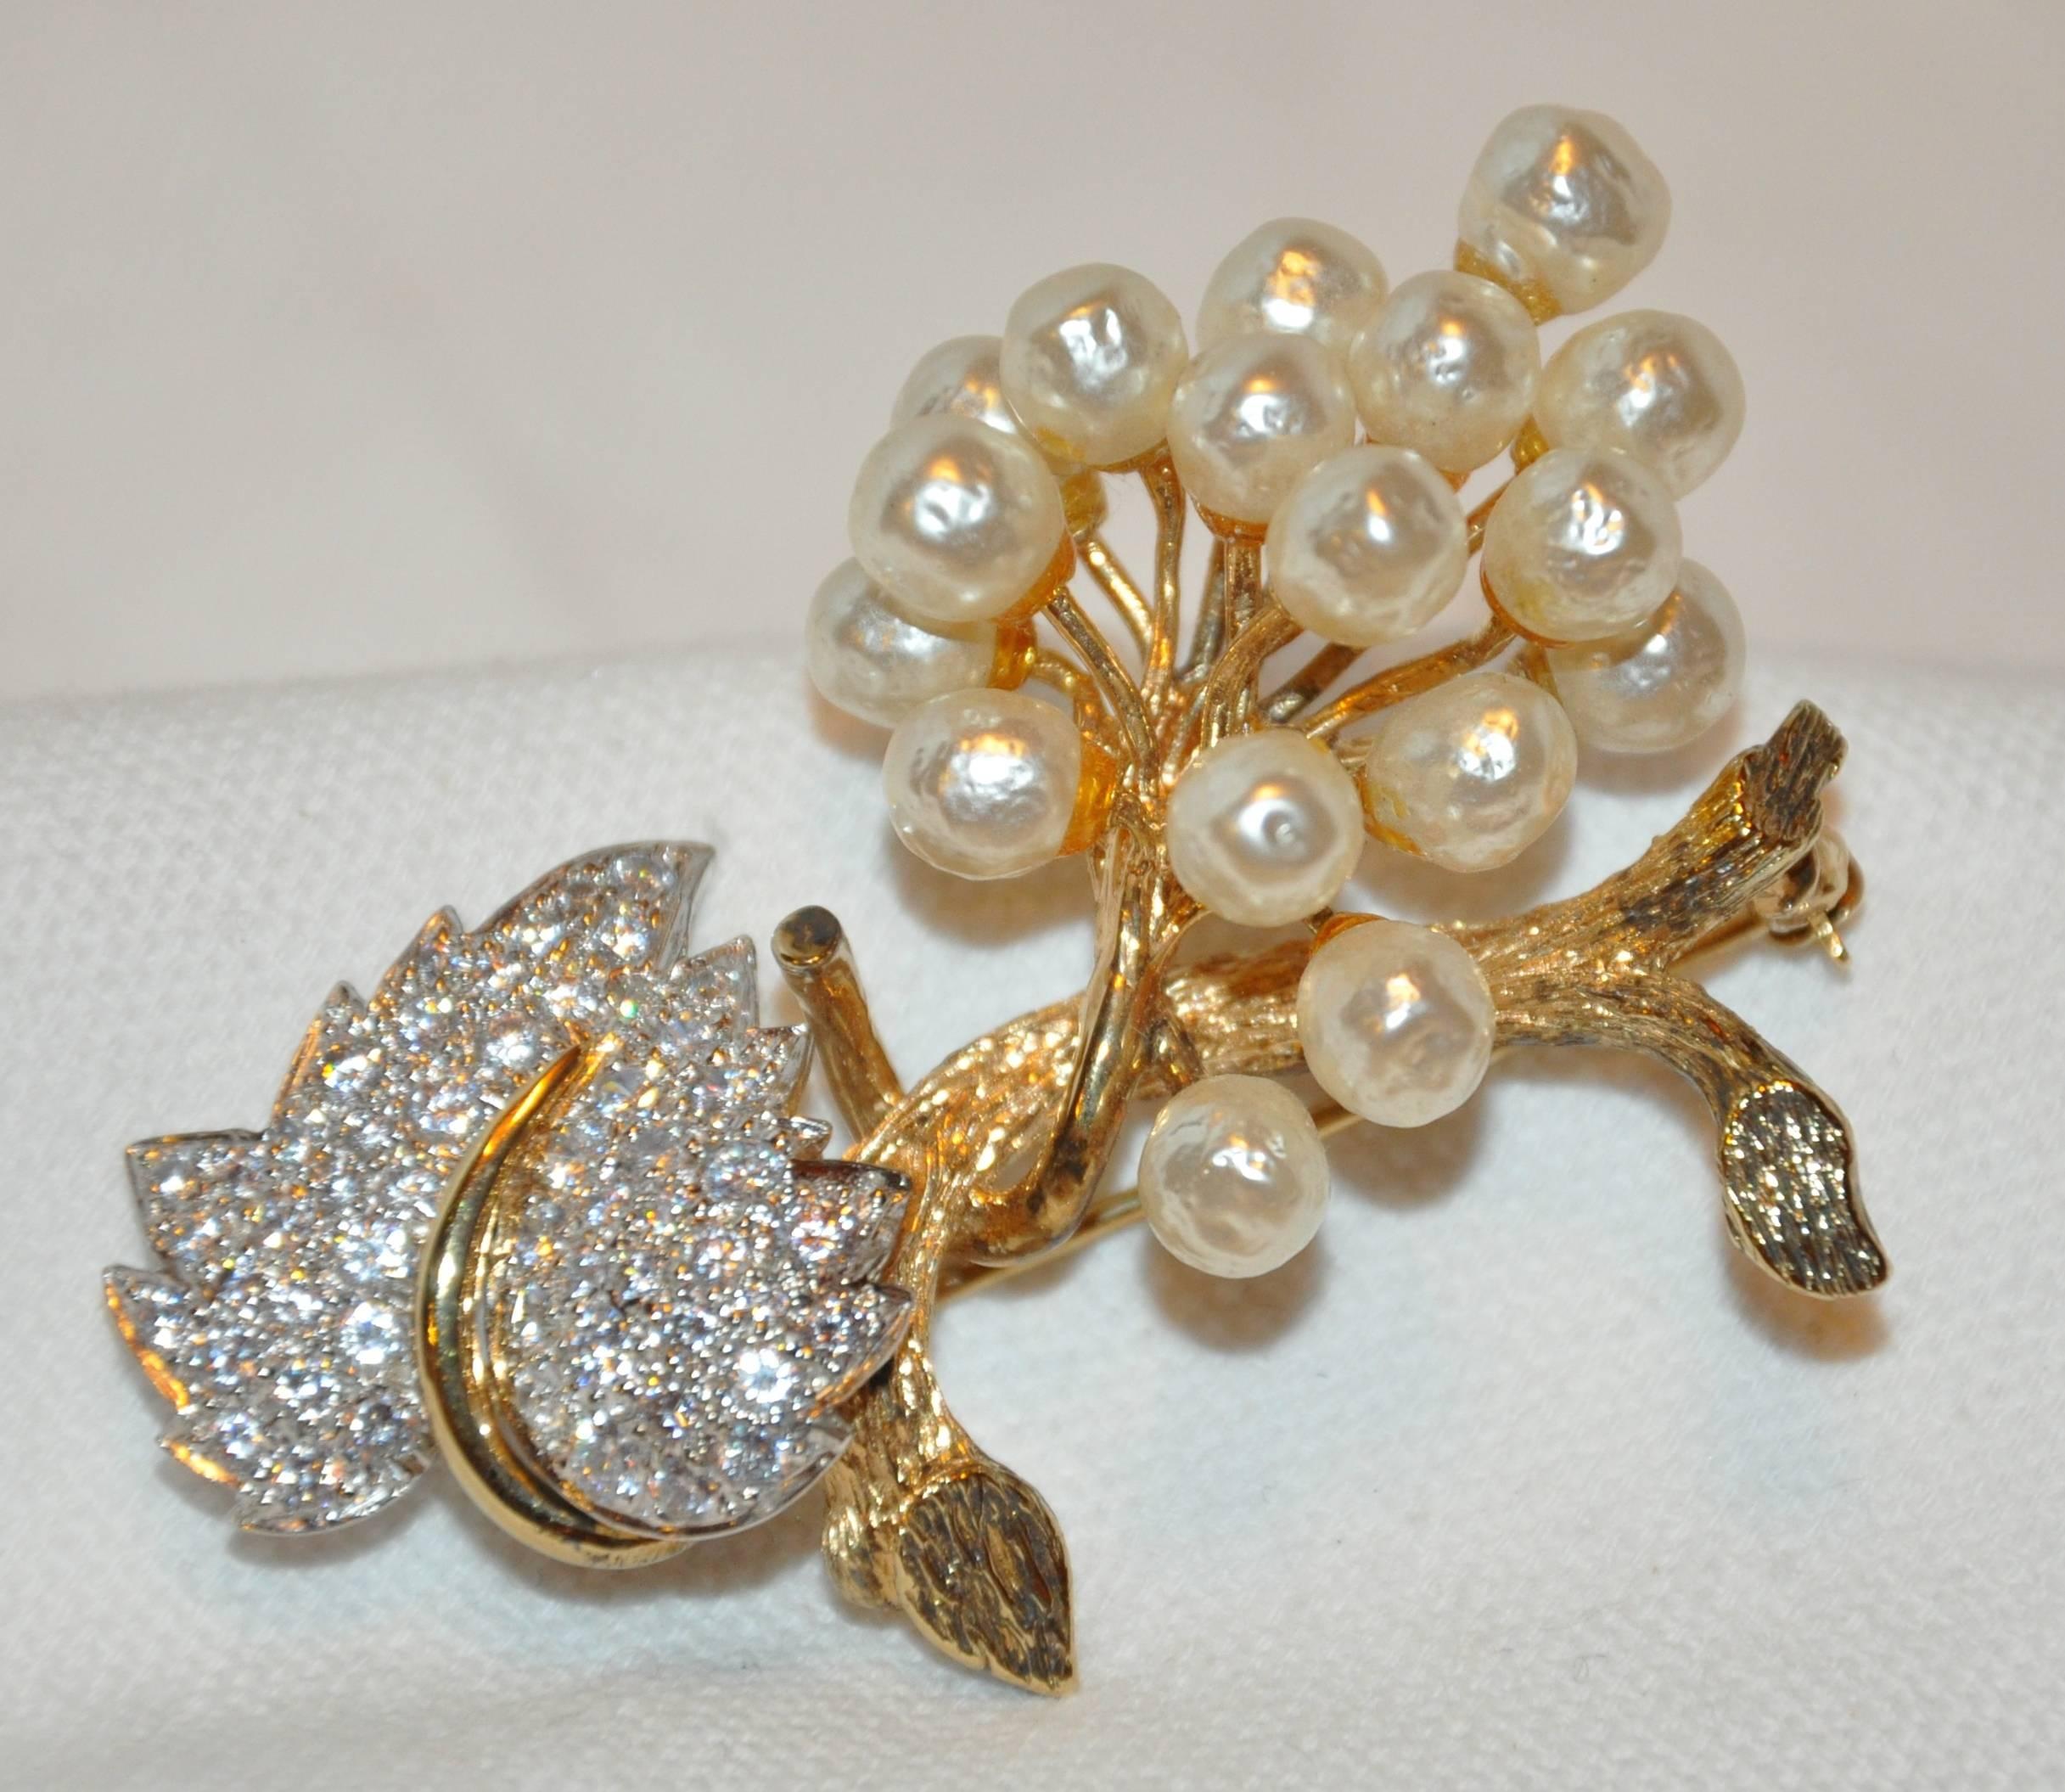        This wonderfully detail "Floral & Leaves" brooch set with brilliant and stunning cut faux diamonds accented with faux pearls in polished gilded gold vermeil hardware measures 2 1/4" in length and 1 1/2" in width, depth